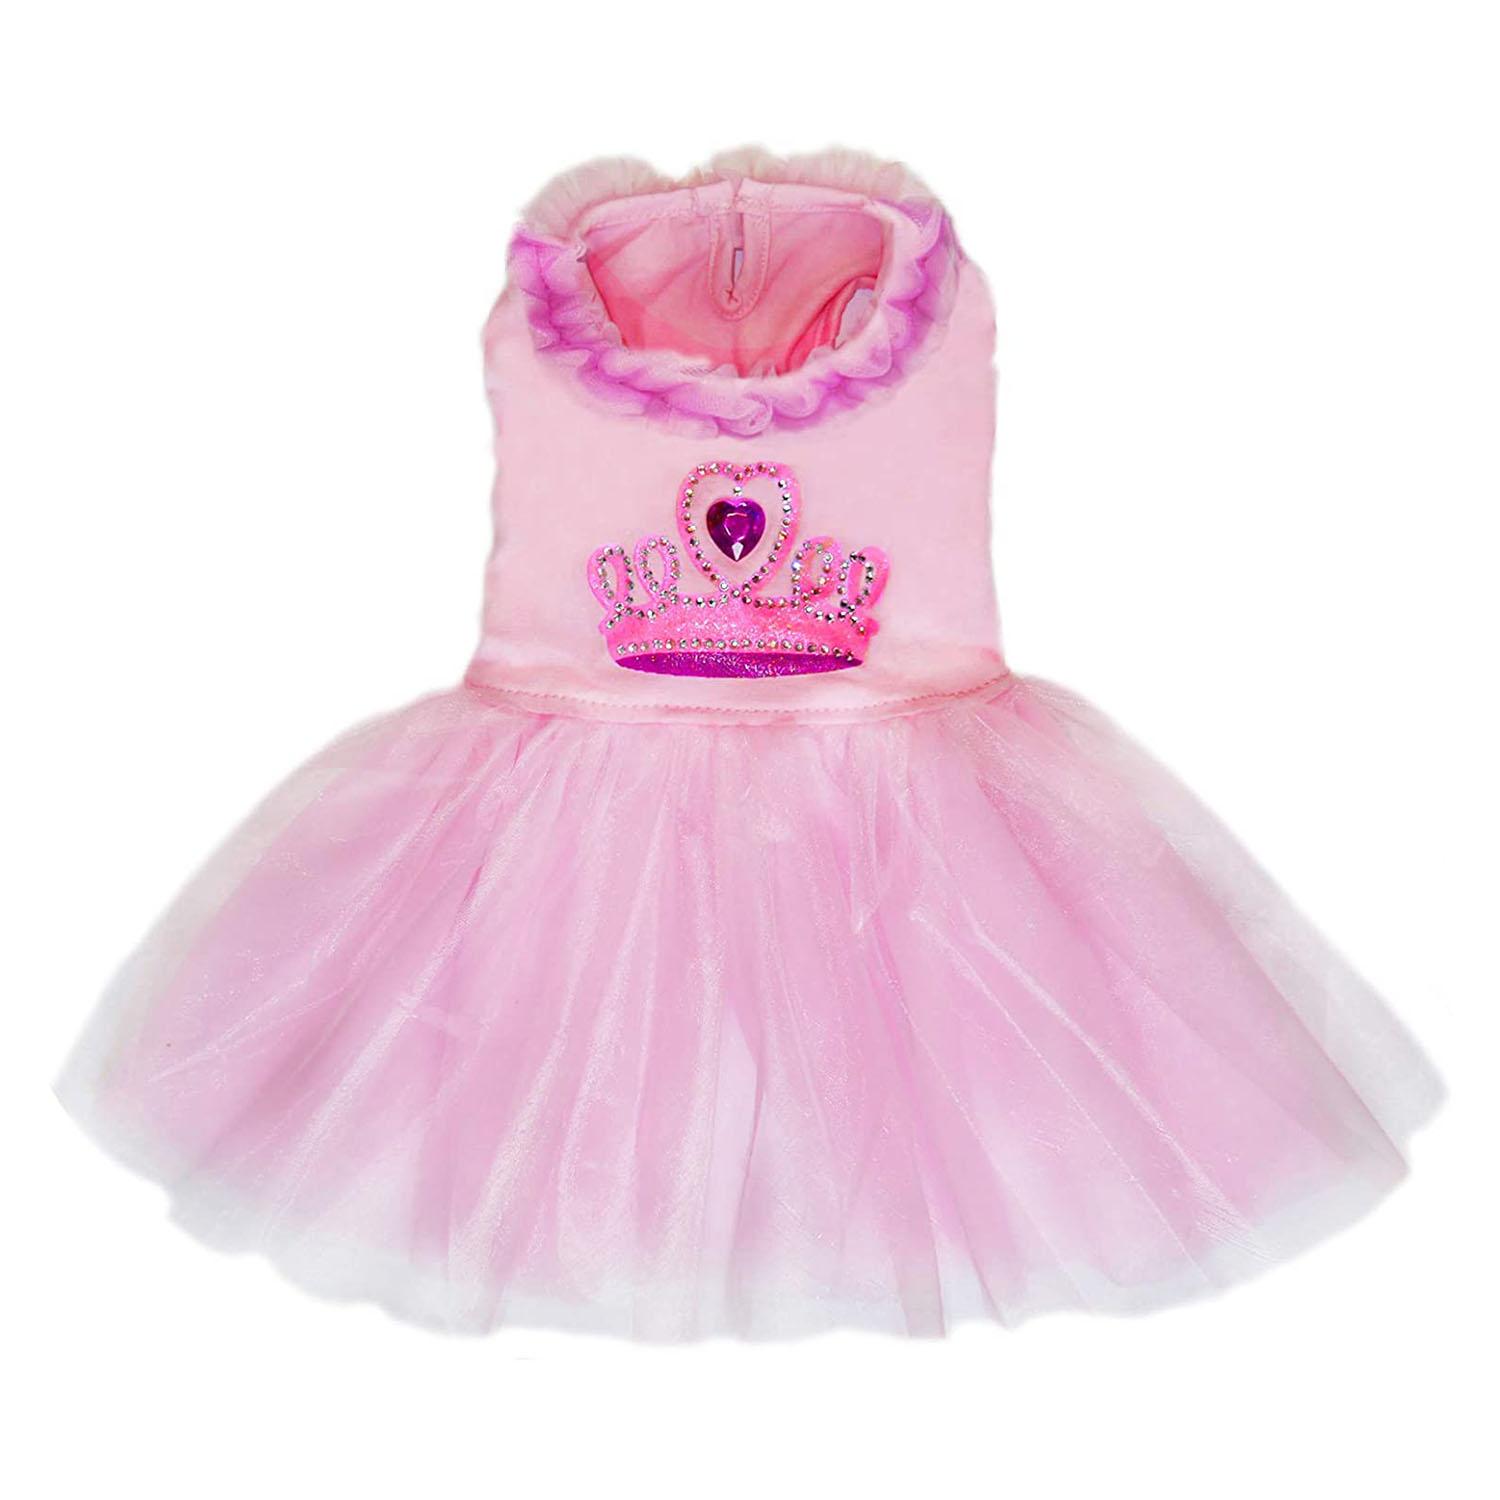 Pooch Outfitters Meghan Dog Party Dress - Pink